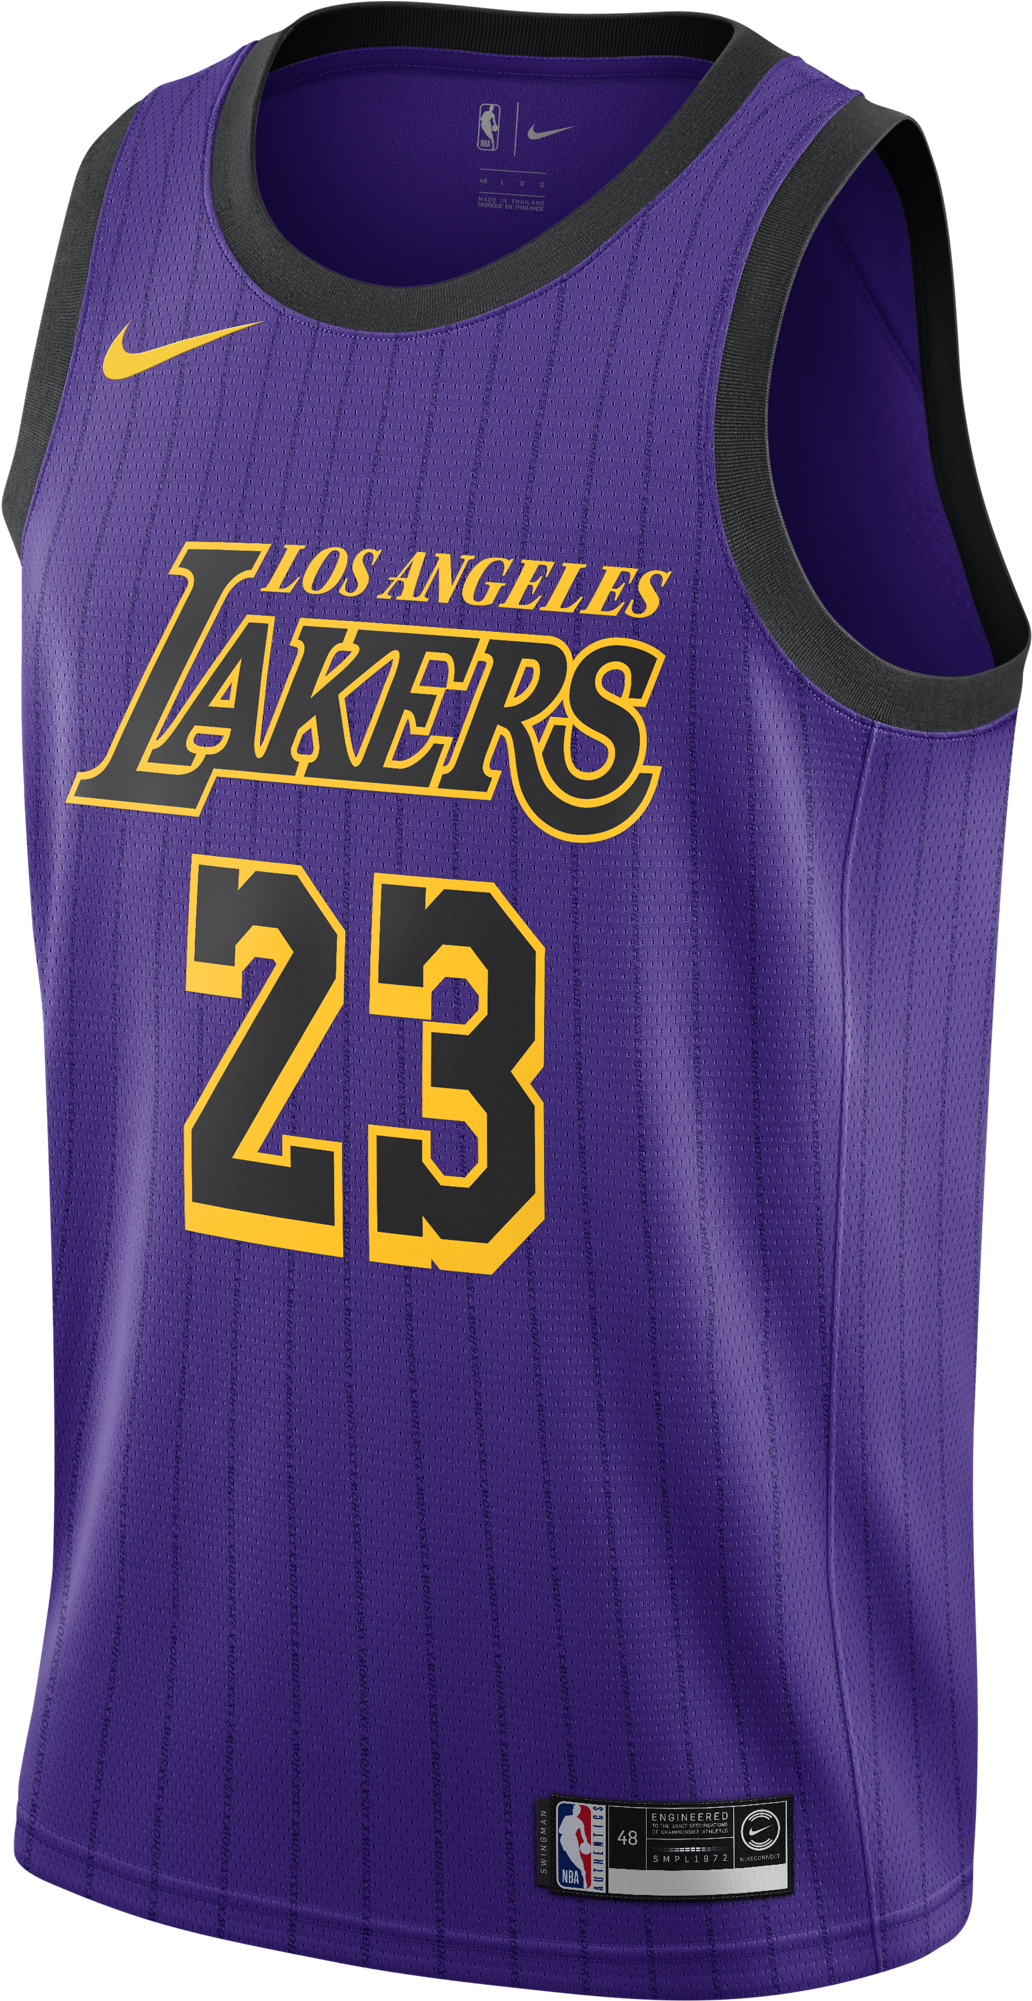 Los Angeles Lakers Jersey Number23 PNG image